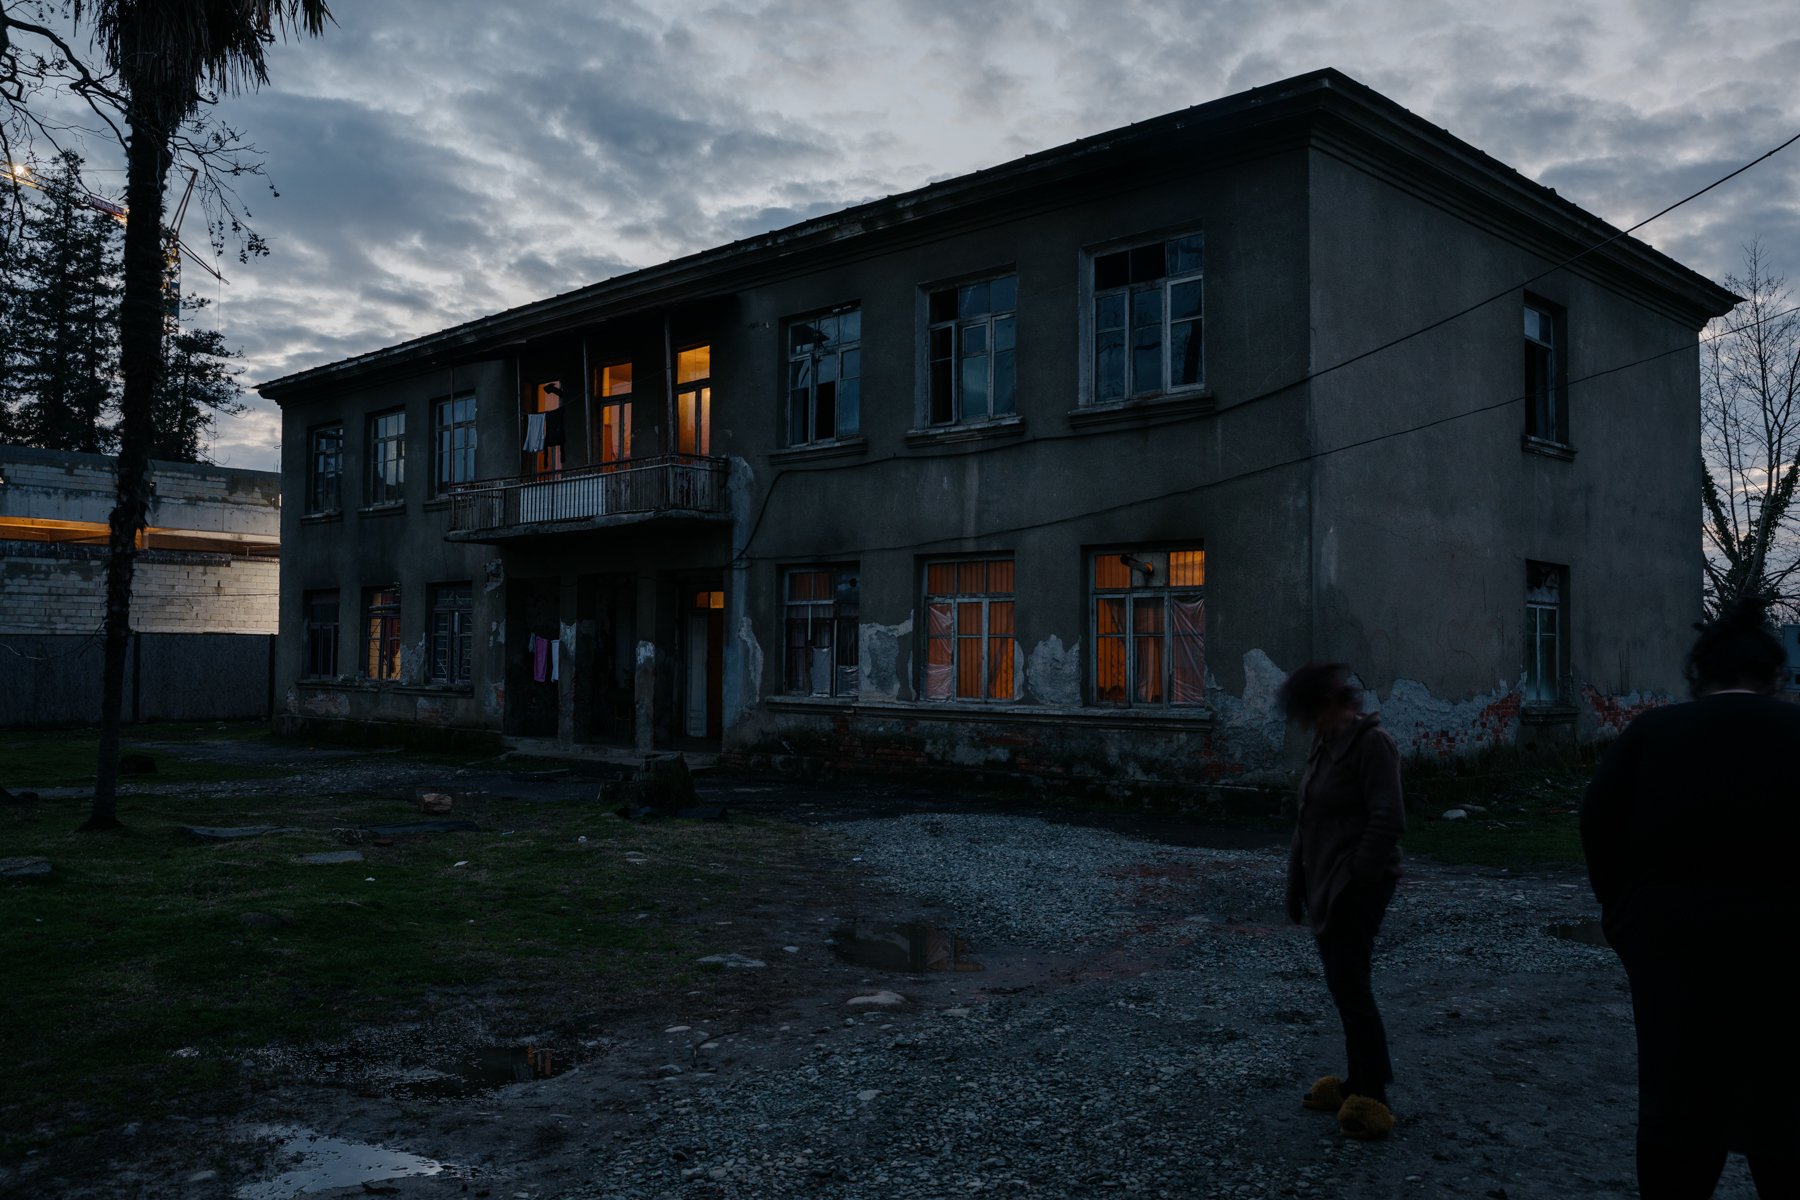  Women stand outside their IDP accommodation in the centre of Zugdidi. Many people have lived in poor conditions in buildings like this since they were displaced during the 1992-1993 Abkhaz War. 